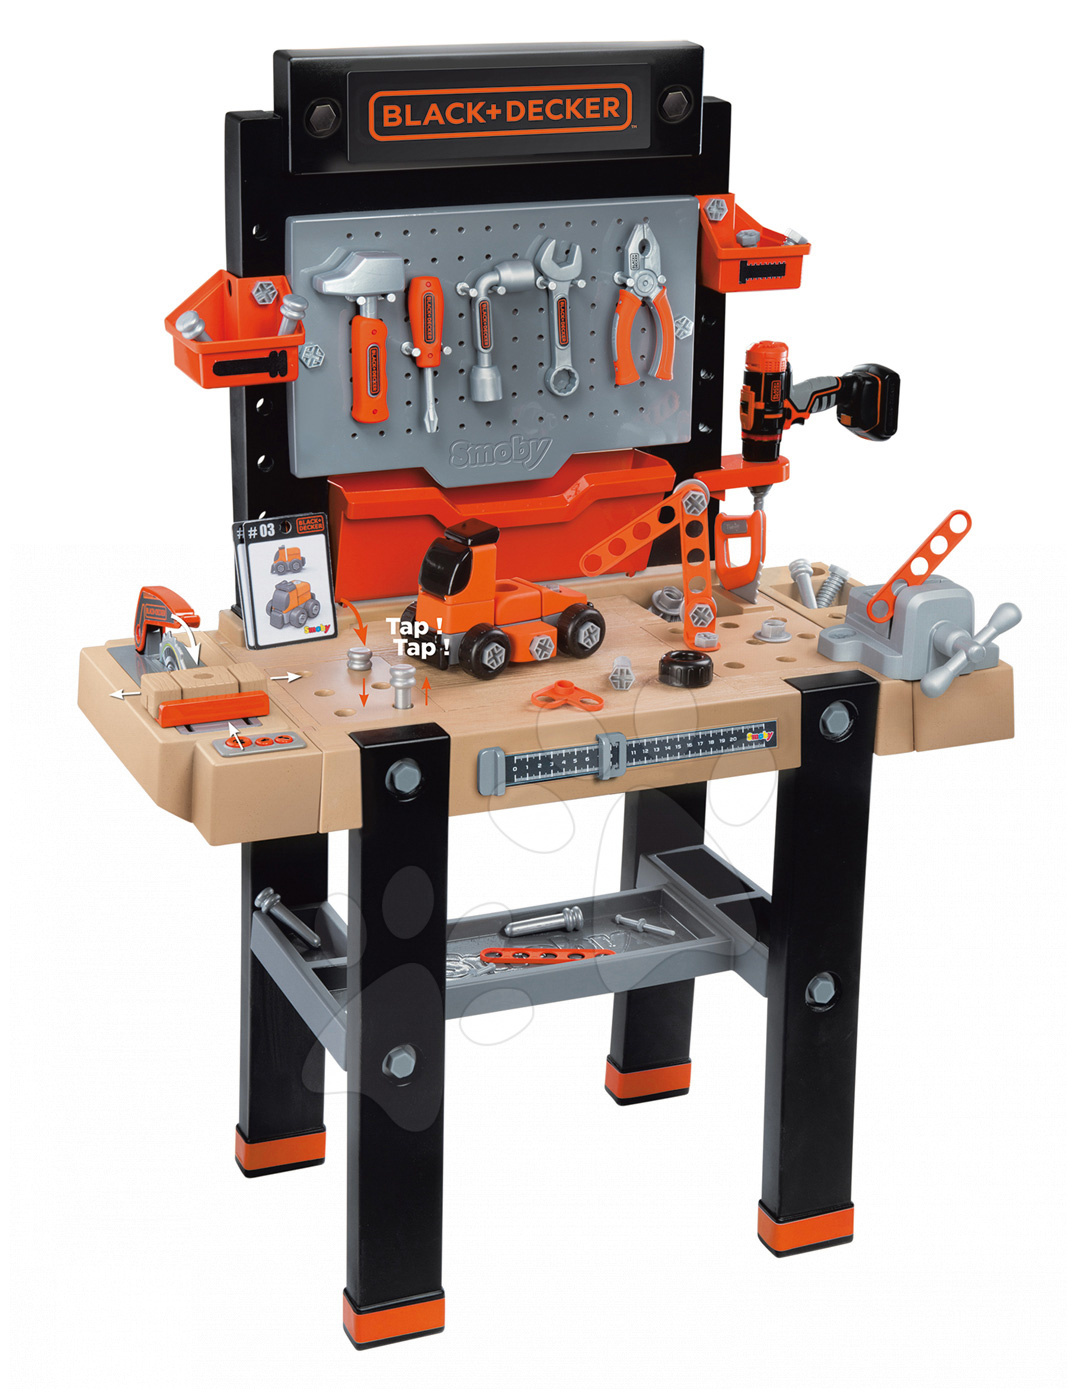 Workbench playsets - Black+Decker Smoby Workbench electronic with a drill, car toy and 95 accessories